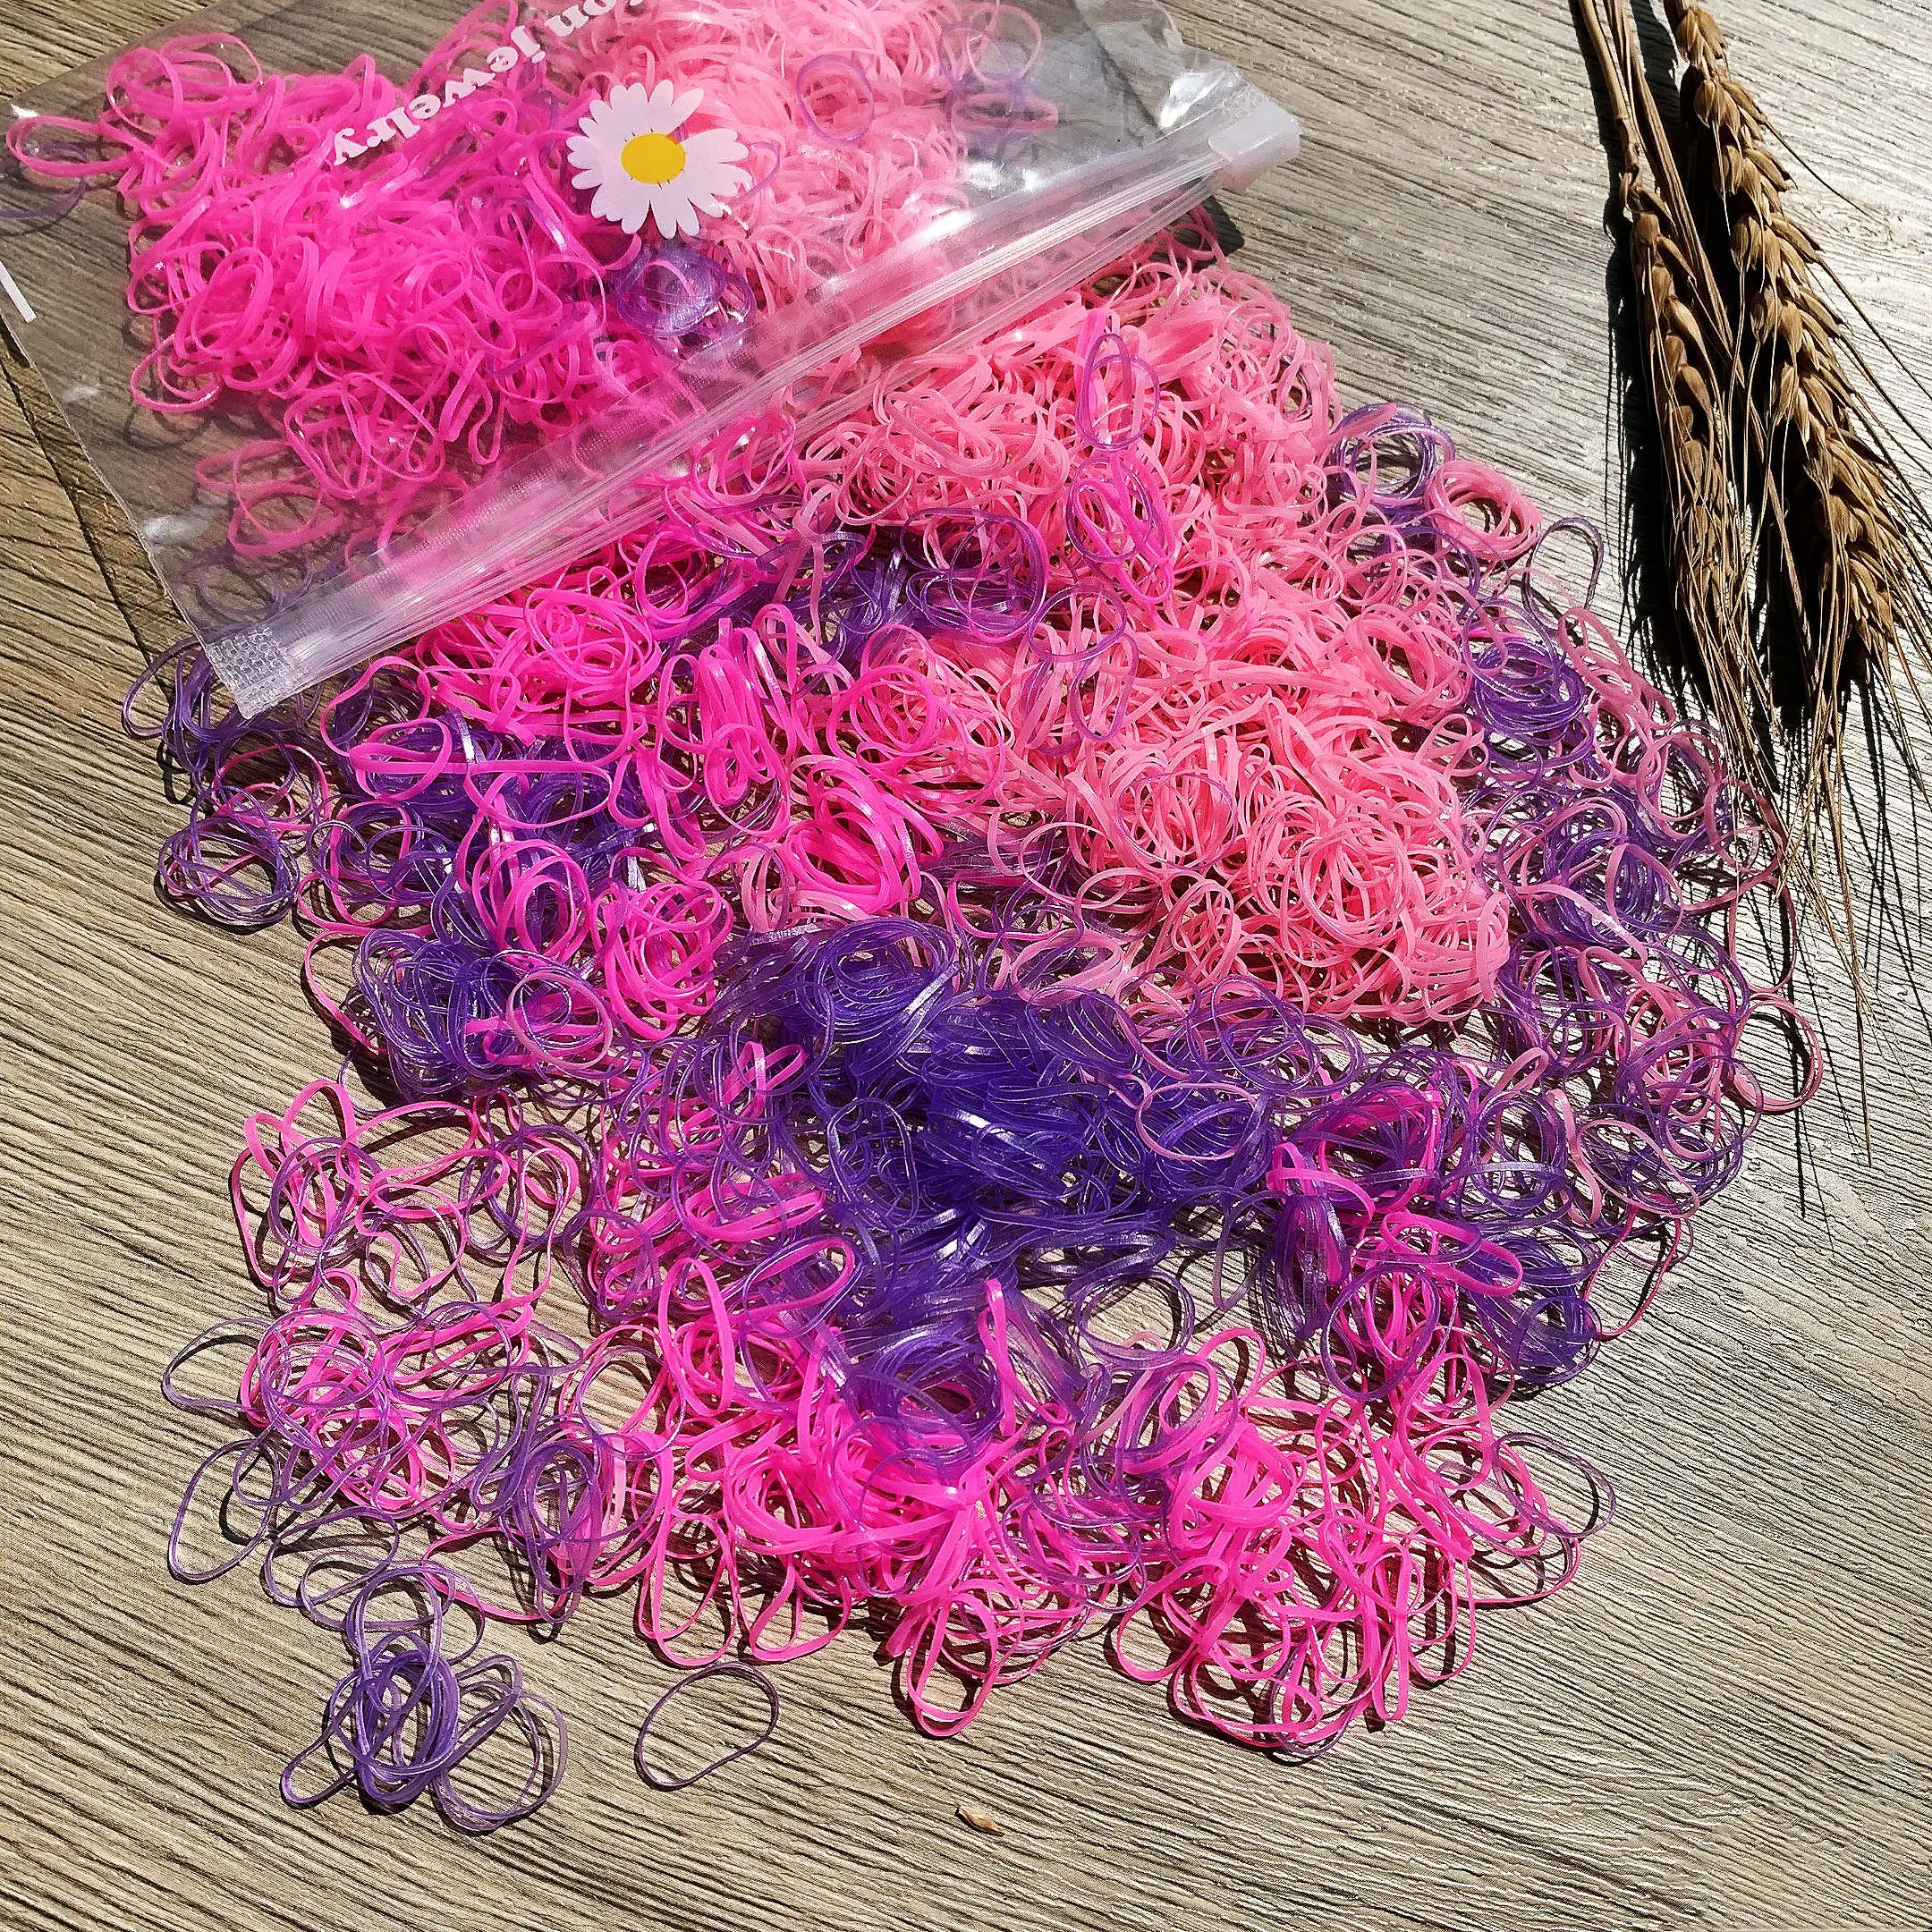 2000PCS Girls Colorful Small Disposable Hair Bands Elastic Rubber Bands Ponytail Holder Kids Headbands Hair Accessories Hair Tie gold hair clips Hair Accessories